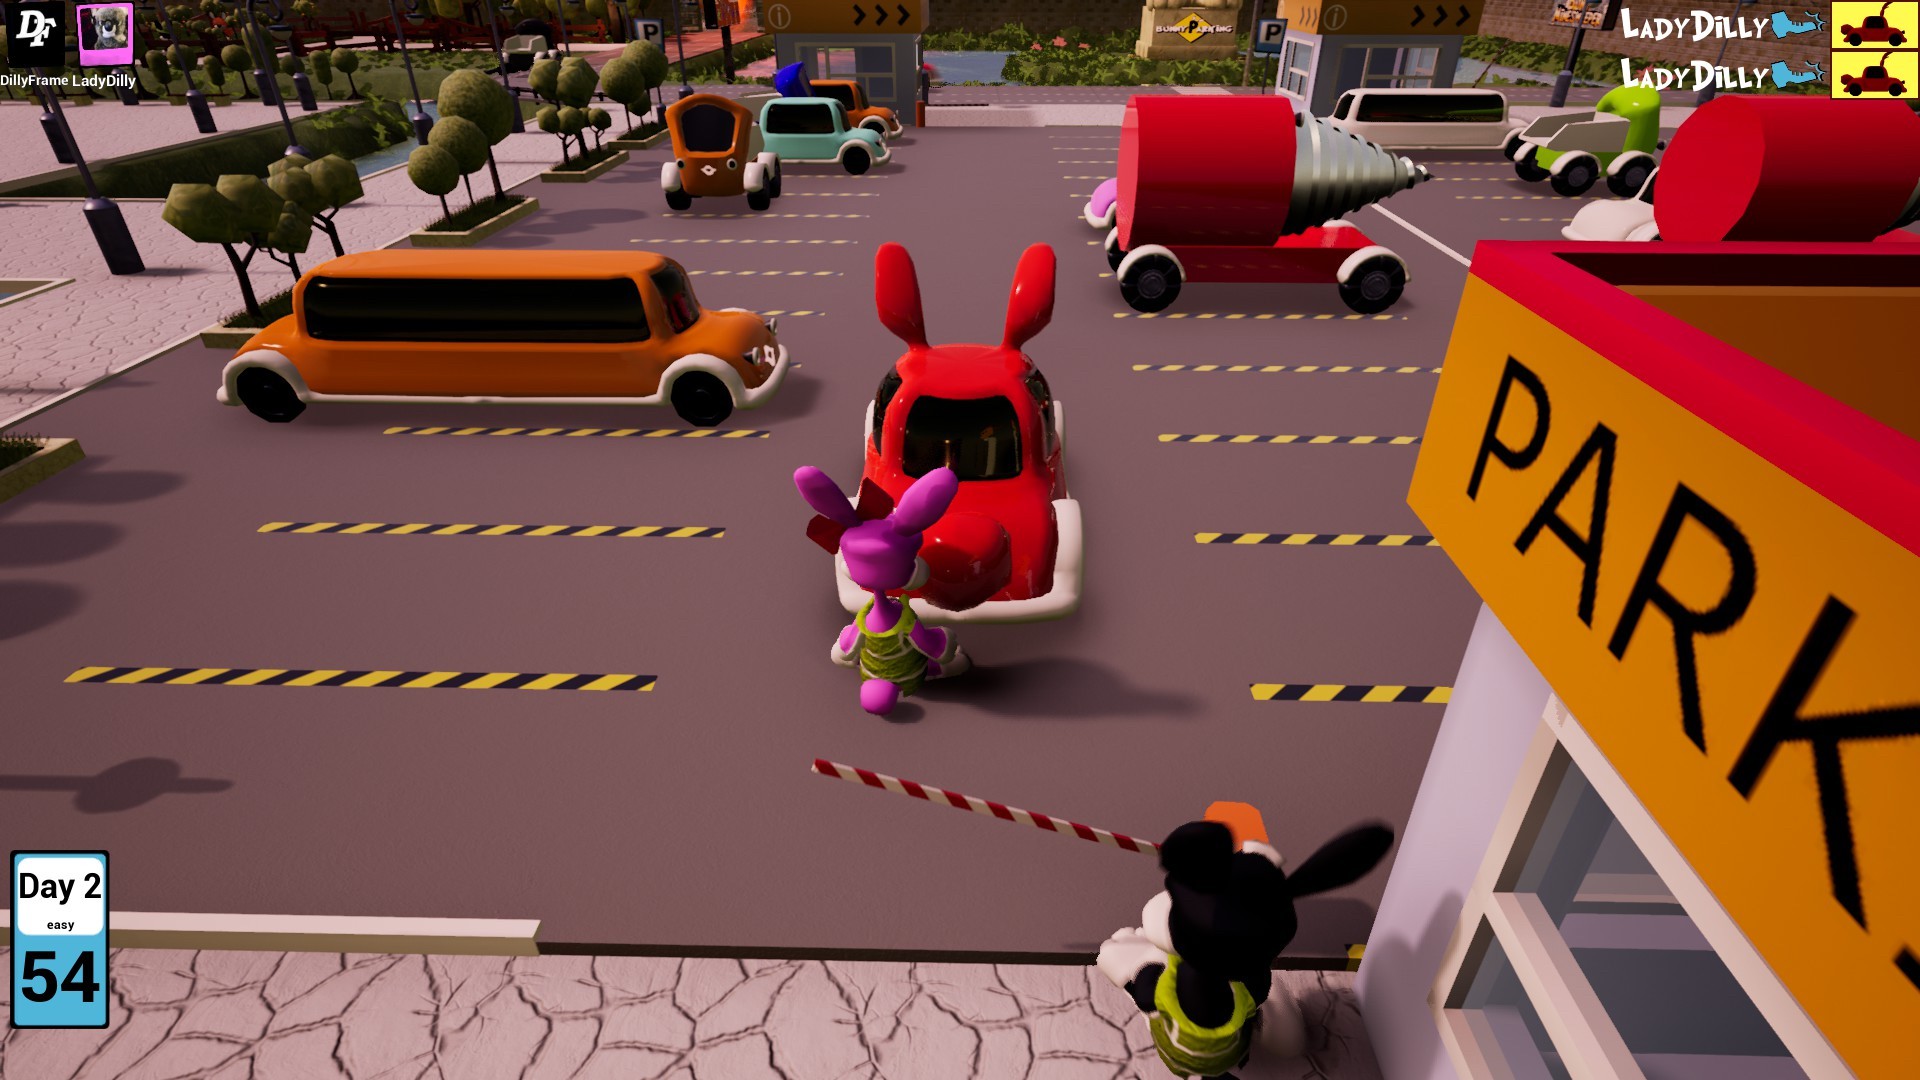 Bunny Parking, Bunny Parking Review, casual, DillyFrame, indie, multiplayer, Puzzle, strategy, Xbox One, Xbox One Review